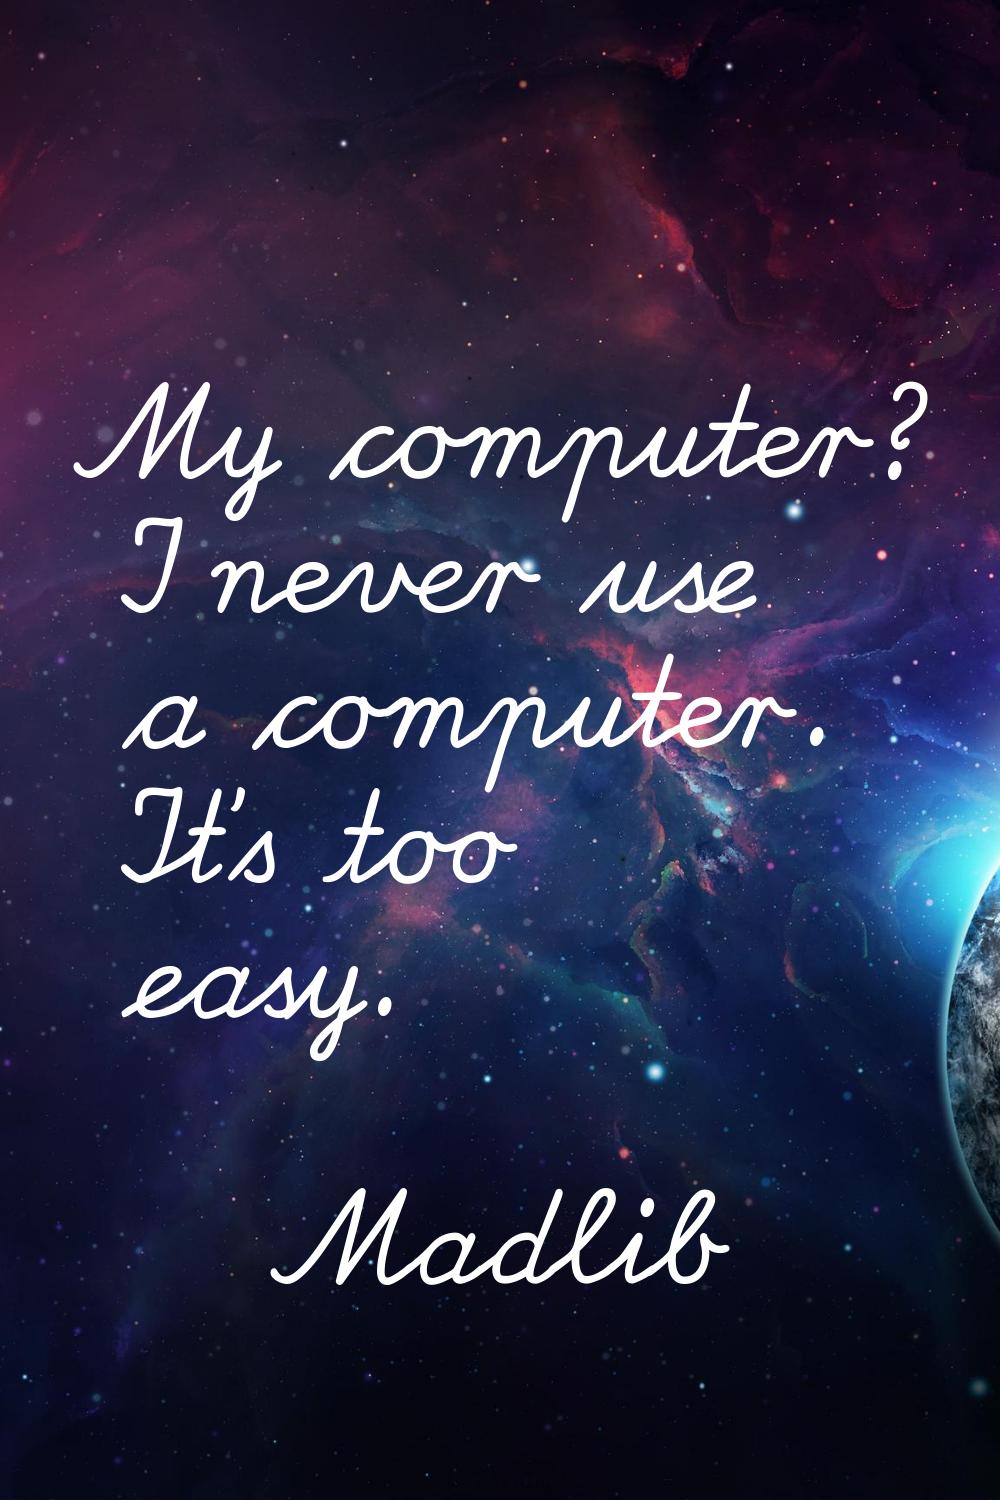 My computer? I never use a computer. It's too easy.